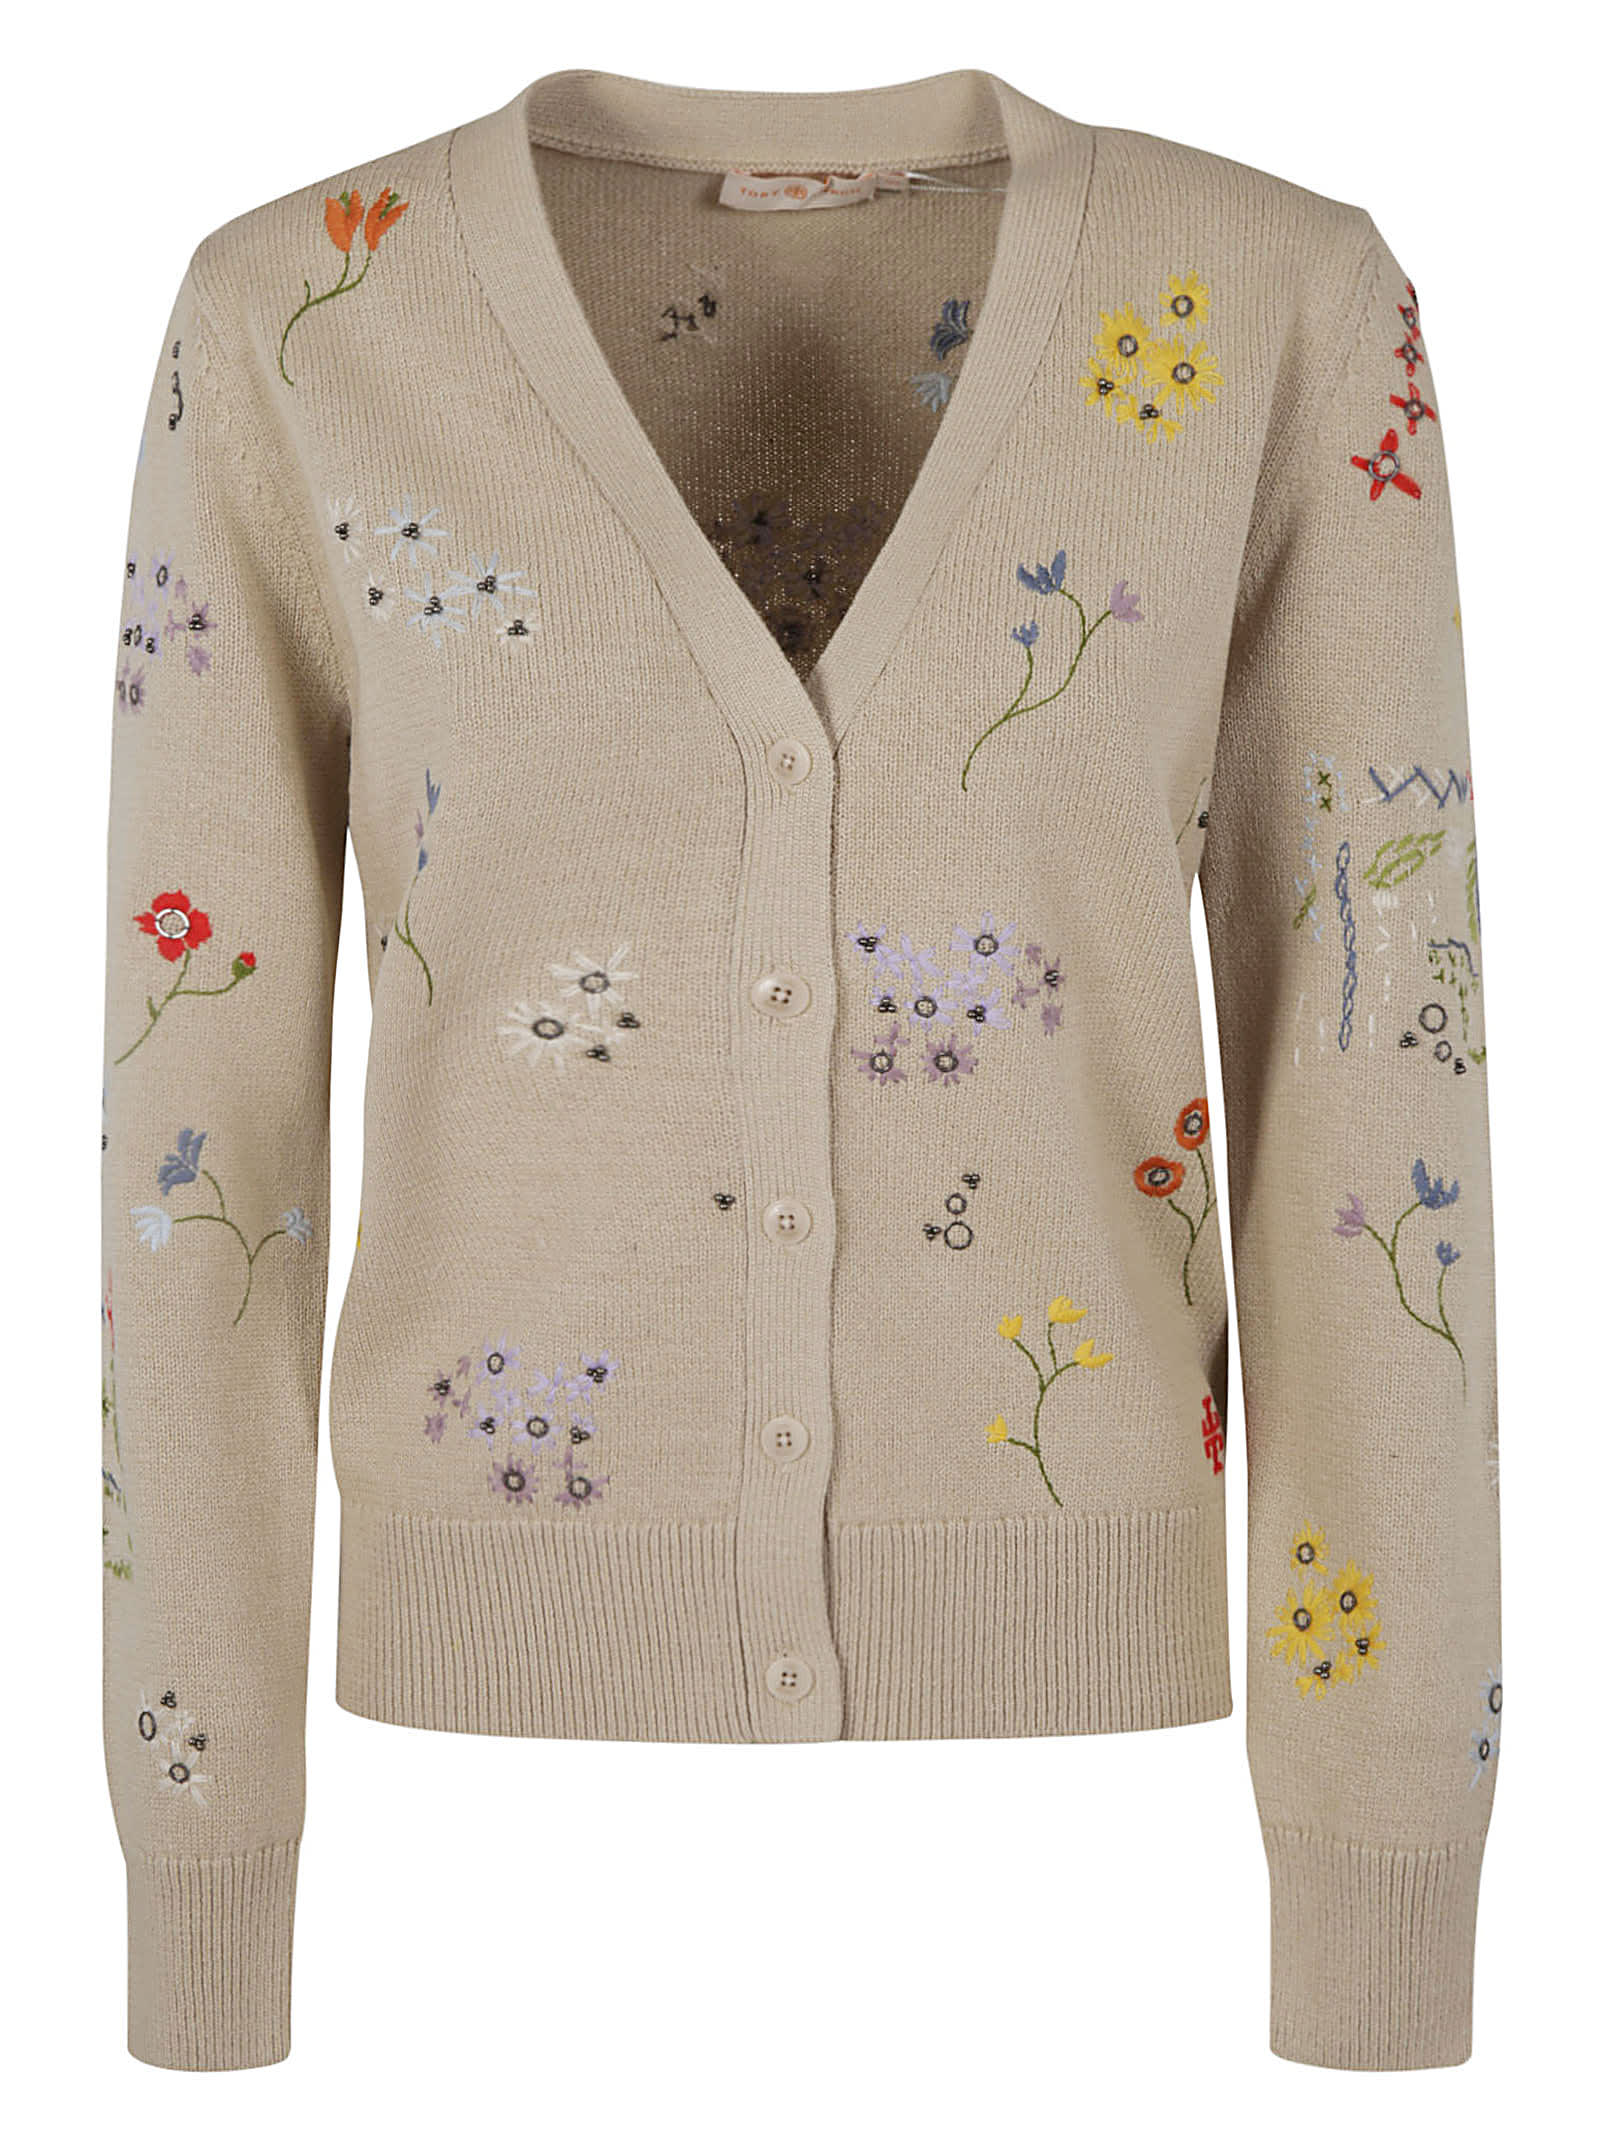 Tory Burch Floral Embroidered Simone Cardigan